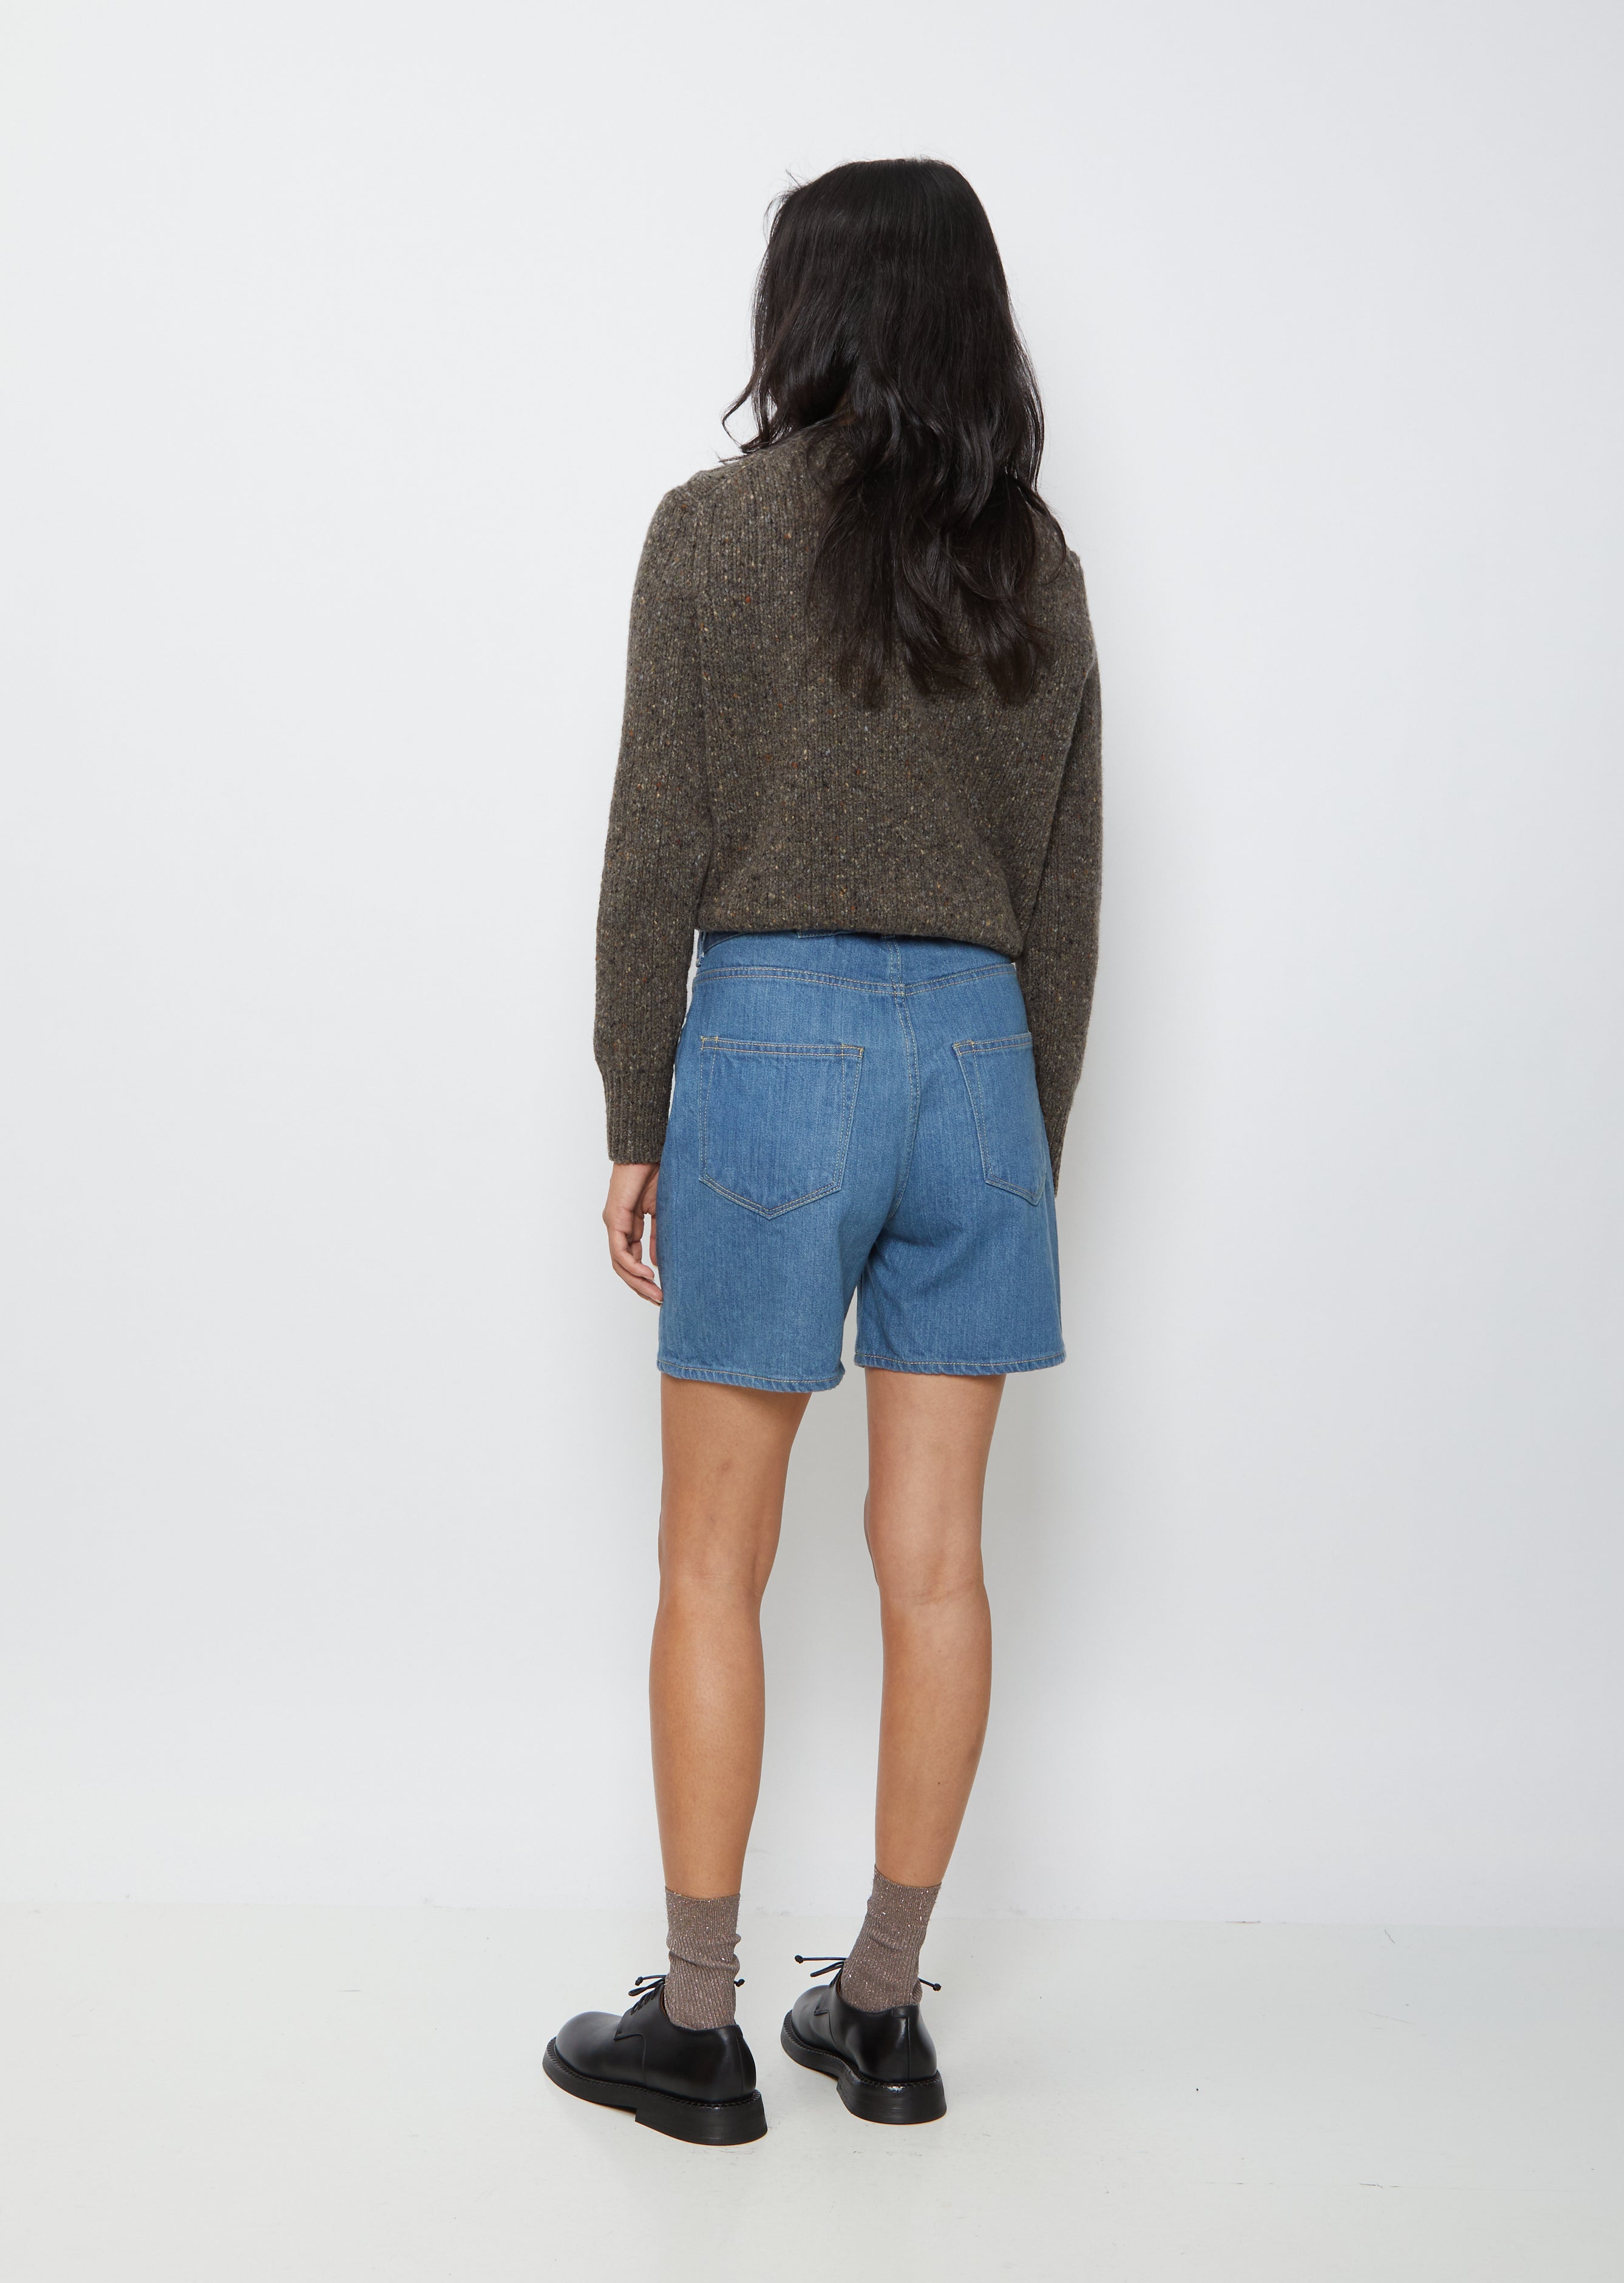 The Coral Jean Short